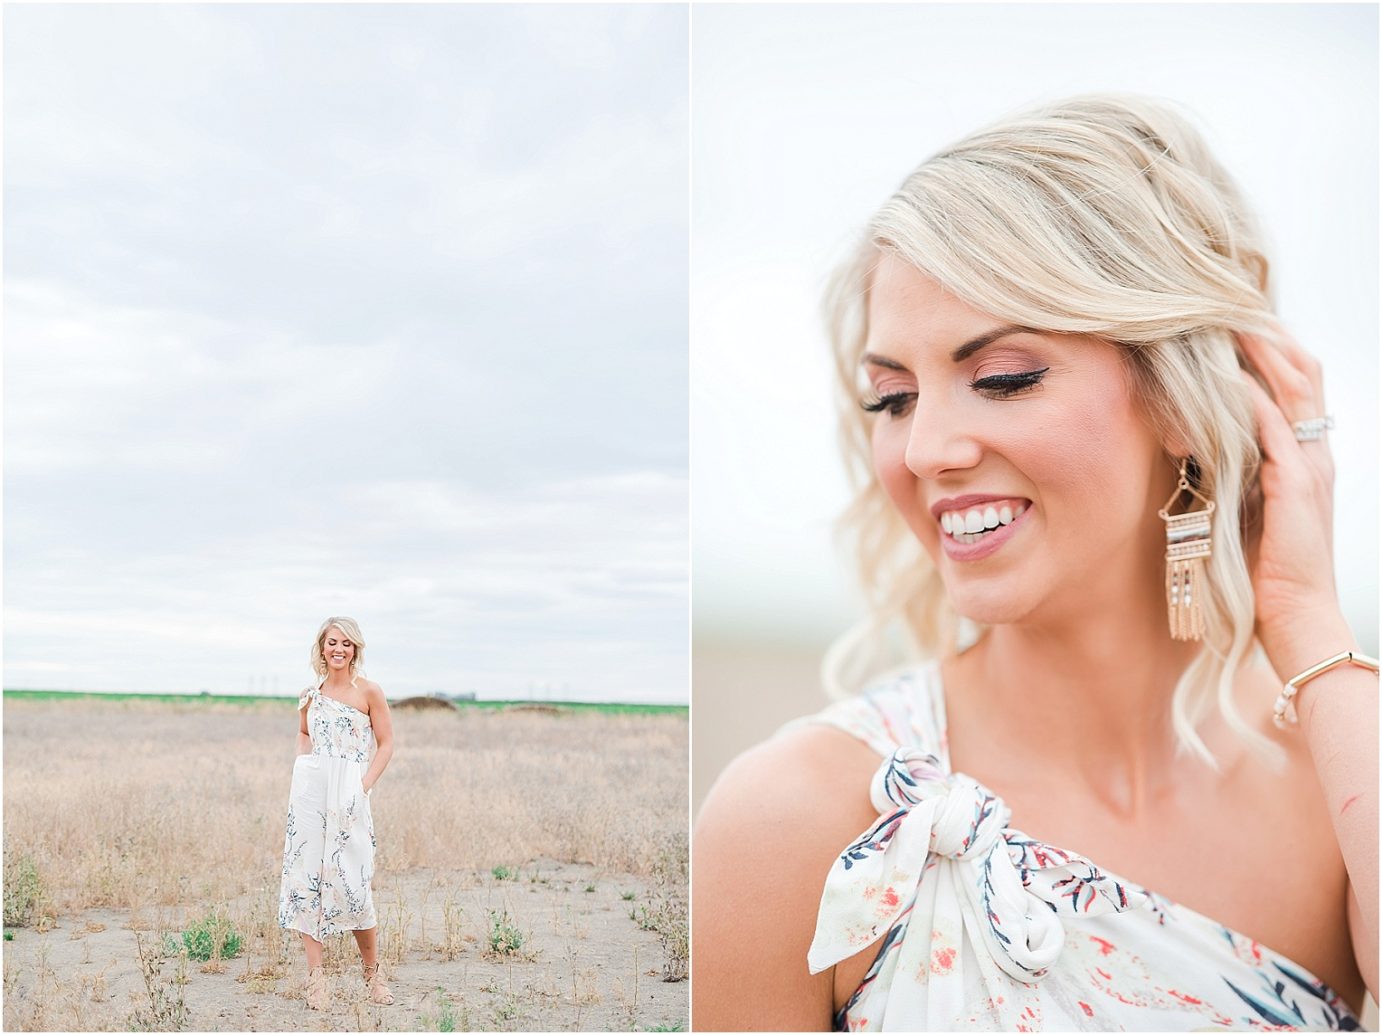 Desert Portrait Session with Mrs. Washington 2017 Deidra in a romper with cute bow